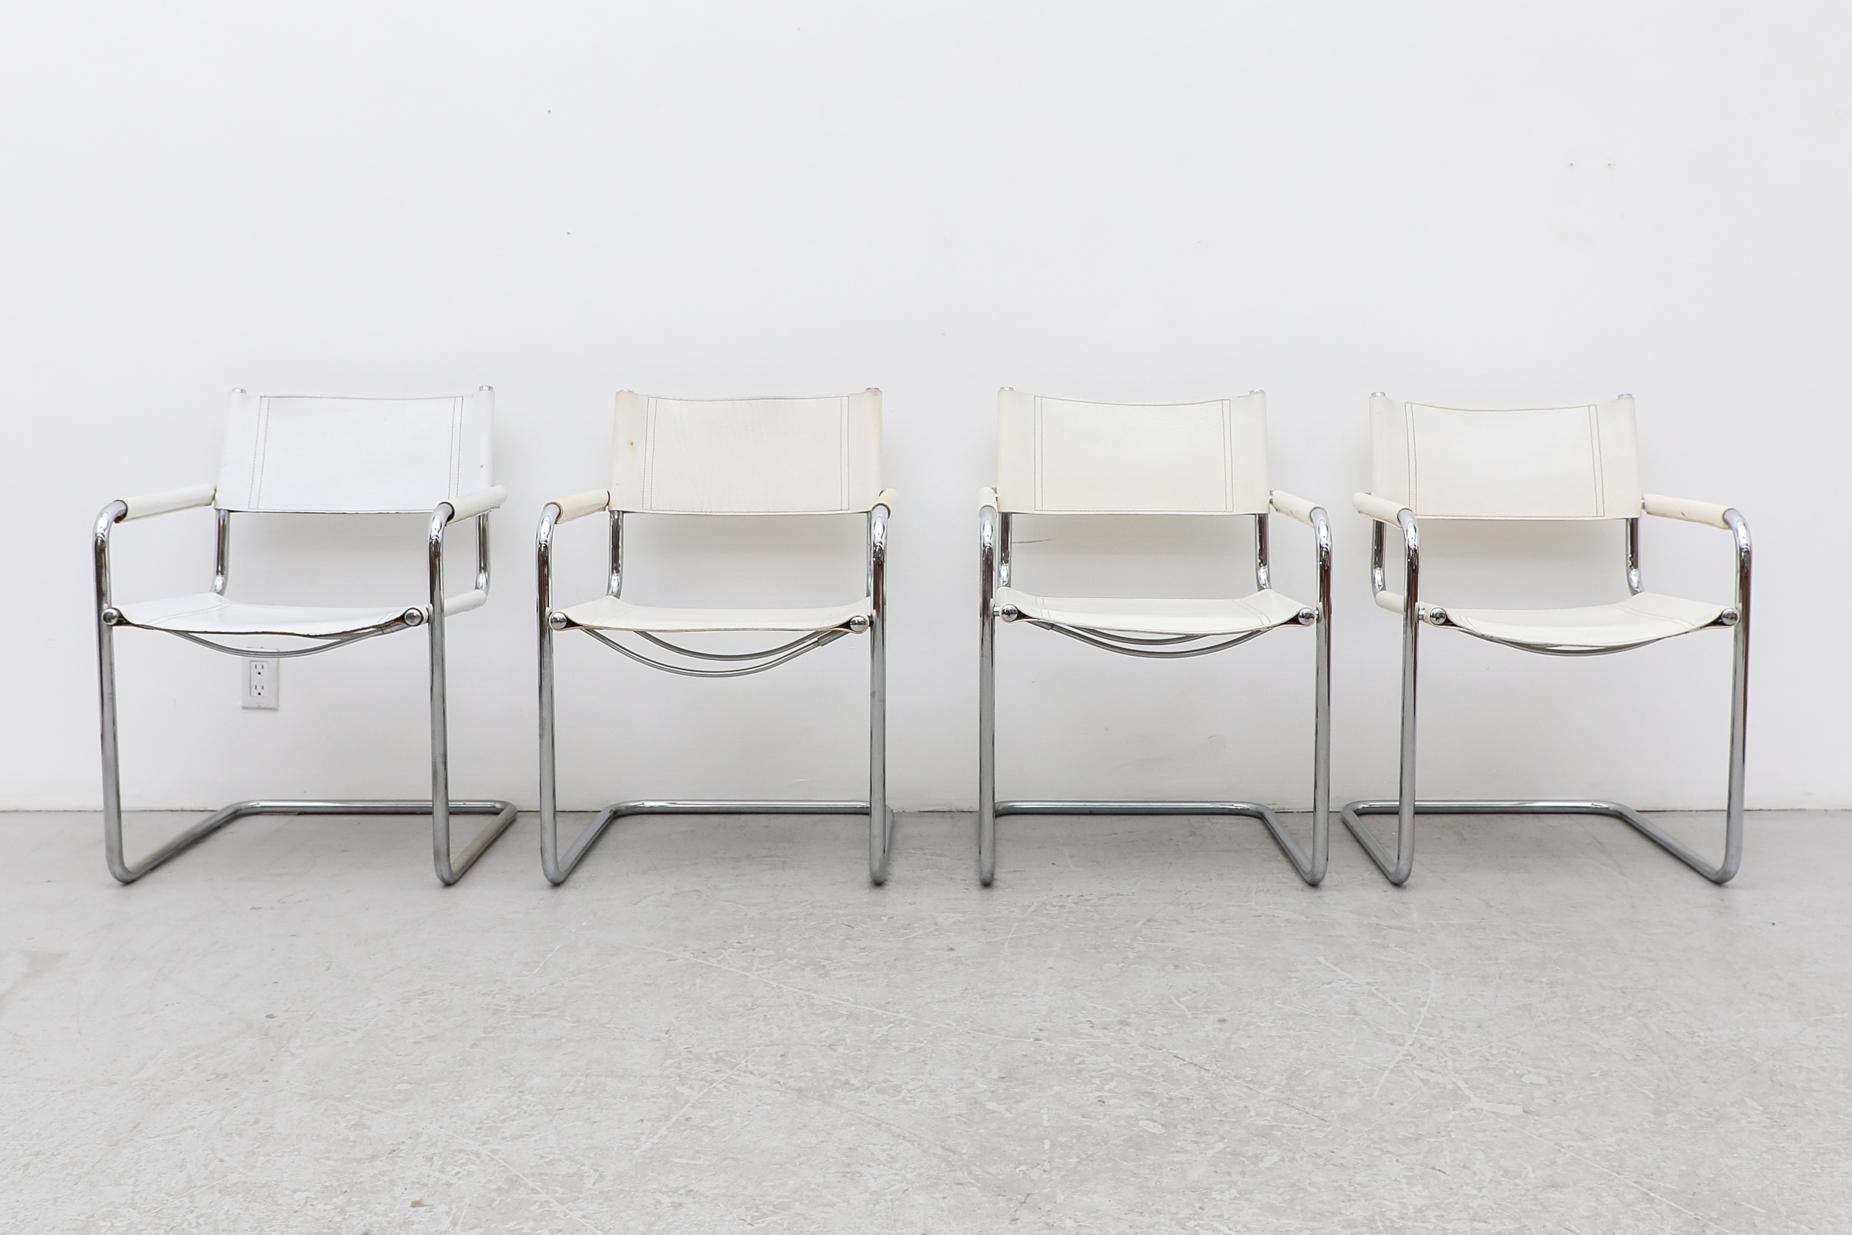 Set of 4 Marcel Breuer style white leather cantilevered chairs with leather wrapped armrests and tubular chrome frames. Inspired by Breuer's iconic D 40 chairs, designed in 1928. One chair is bright white and the other 3 are more off-white. Each